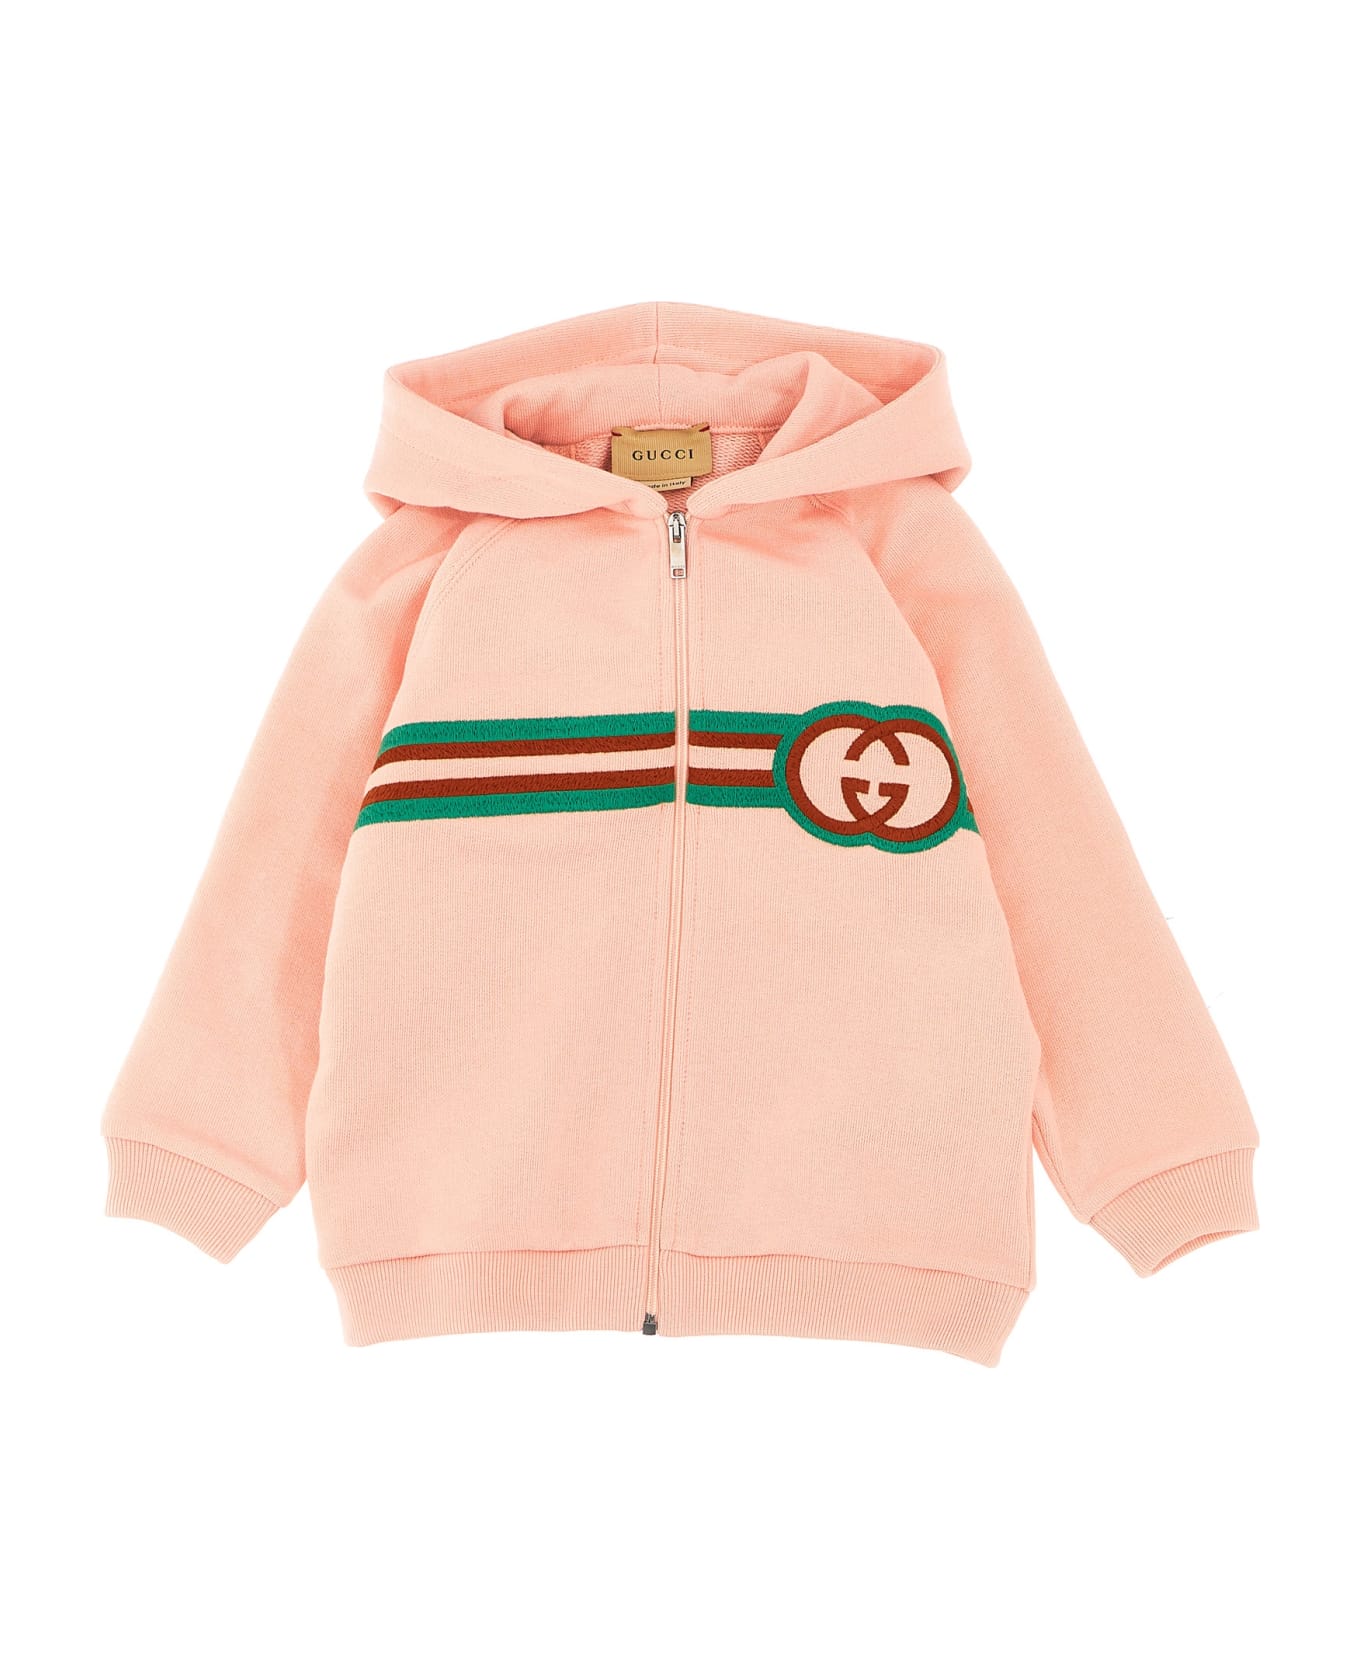 Gucci style Logo Embroidery Hoodie - PINK